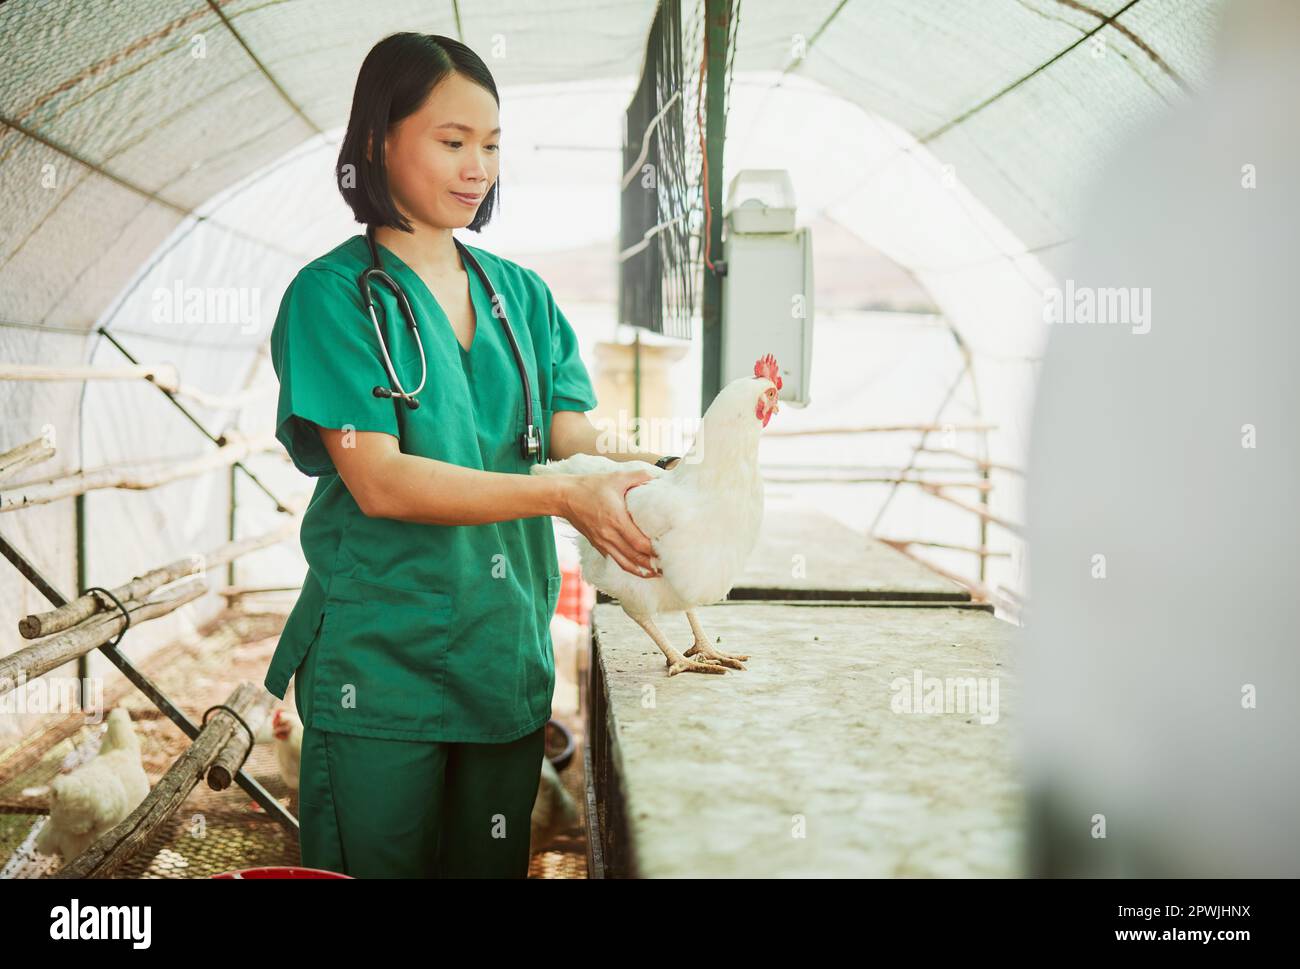 Woman, veterinary or chicken farm check in bird flu vaccine, growth hormone medicine or pet wellness insurance. Happy, healthcare worker or animal doc Stock Photo